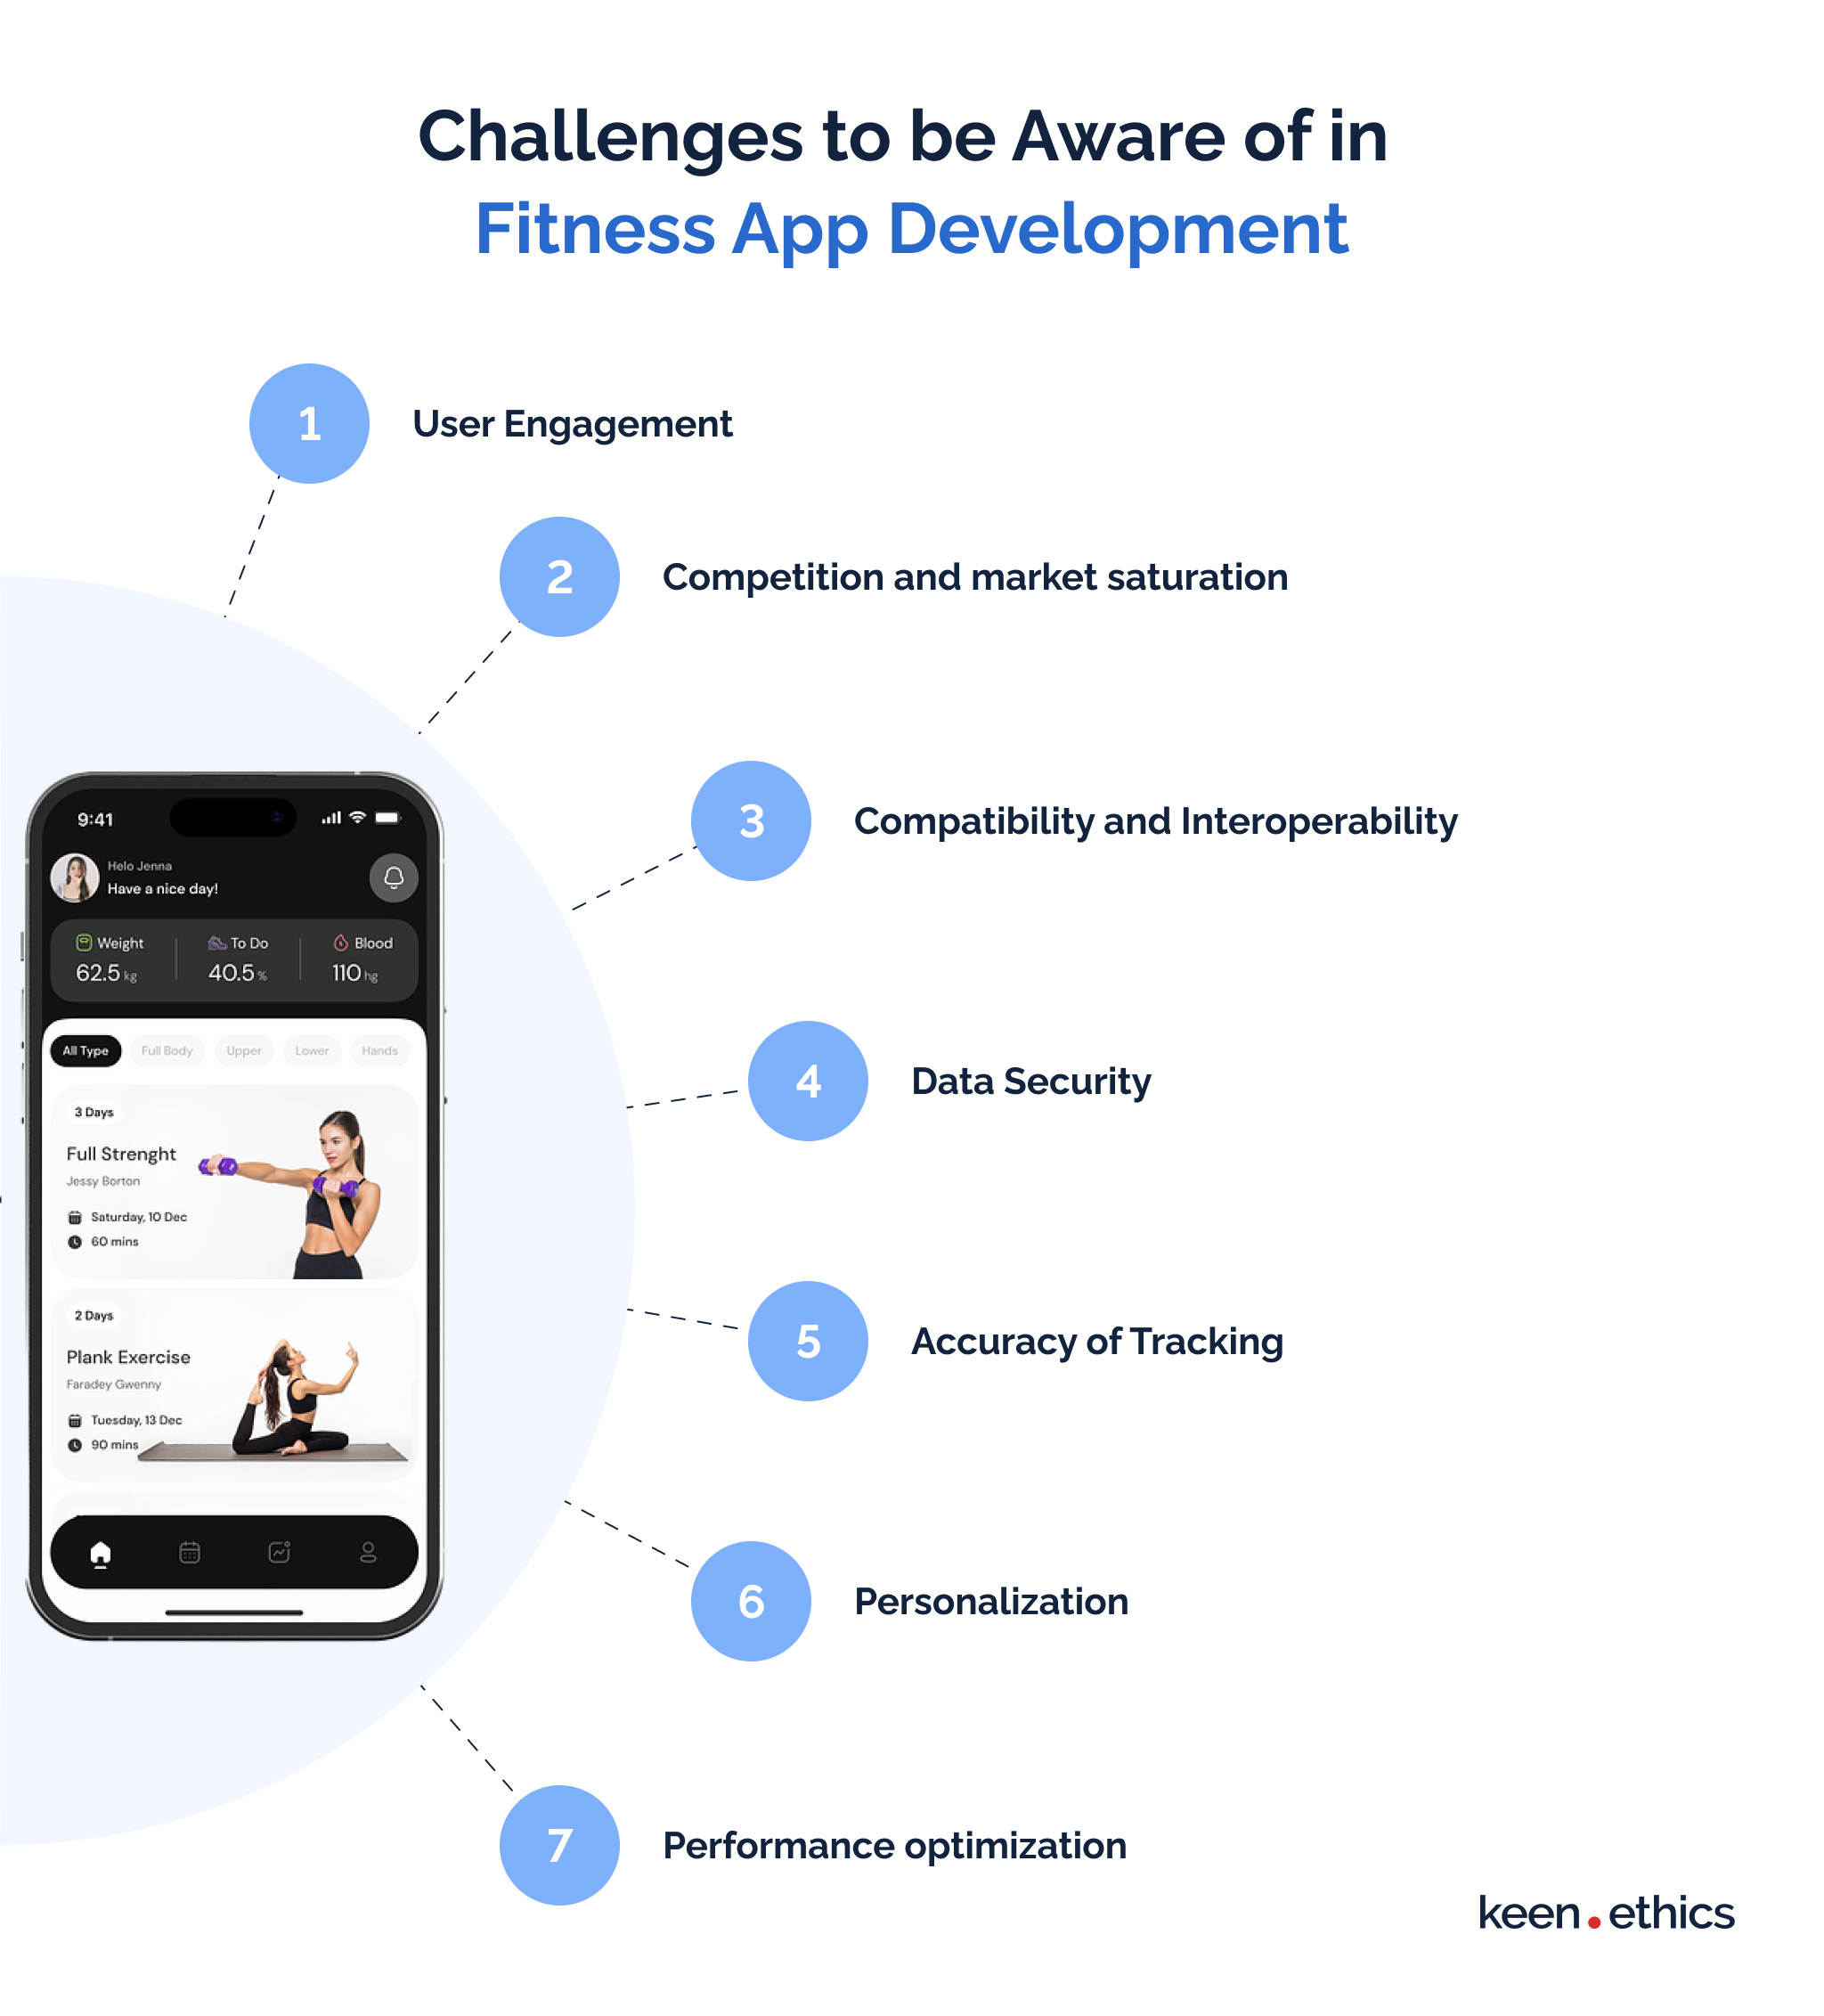 Challenges to be Aware of in Fitness App Development